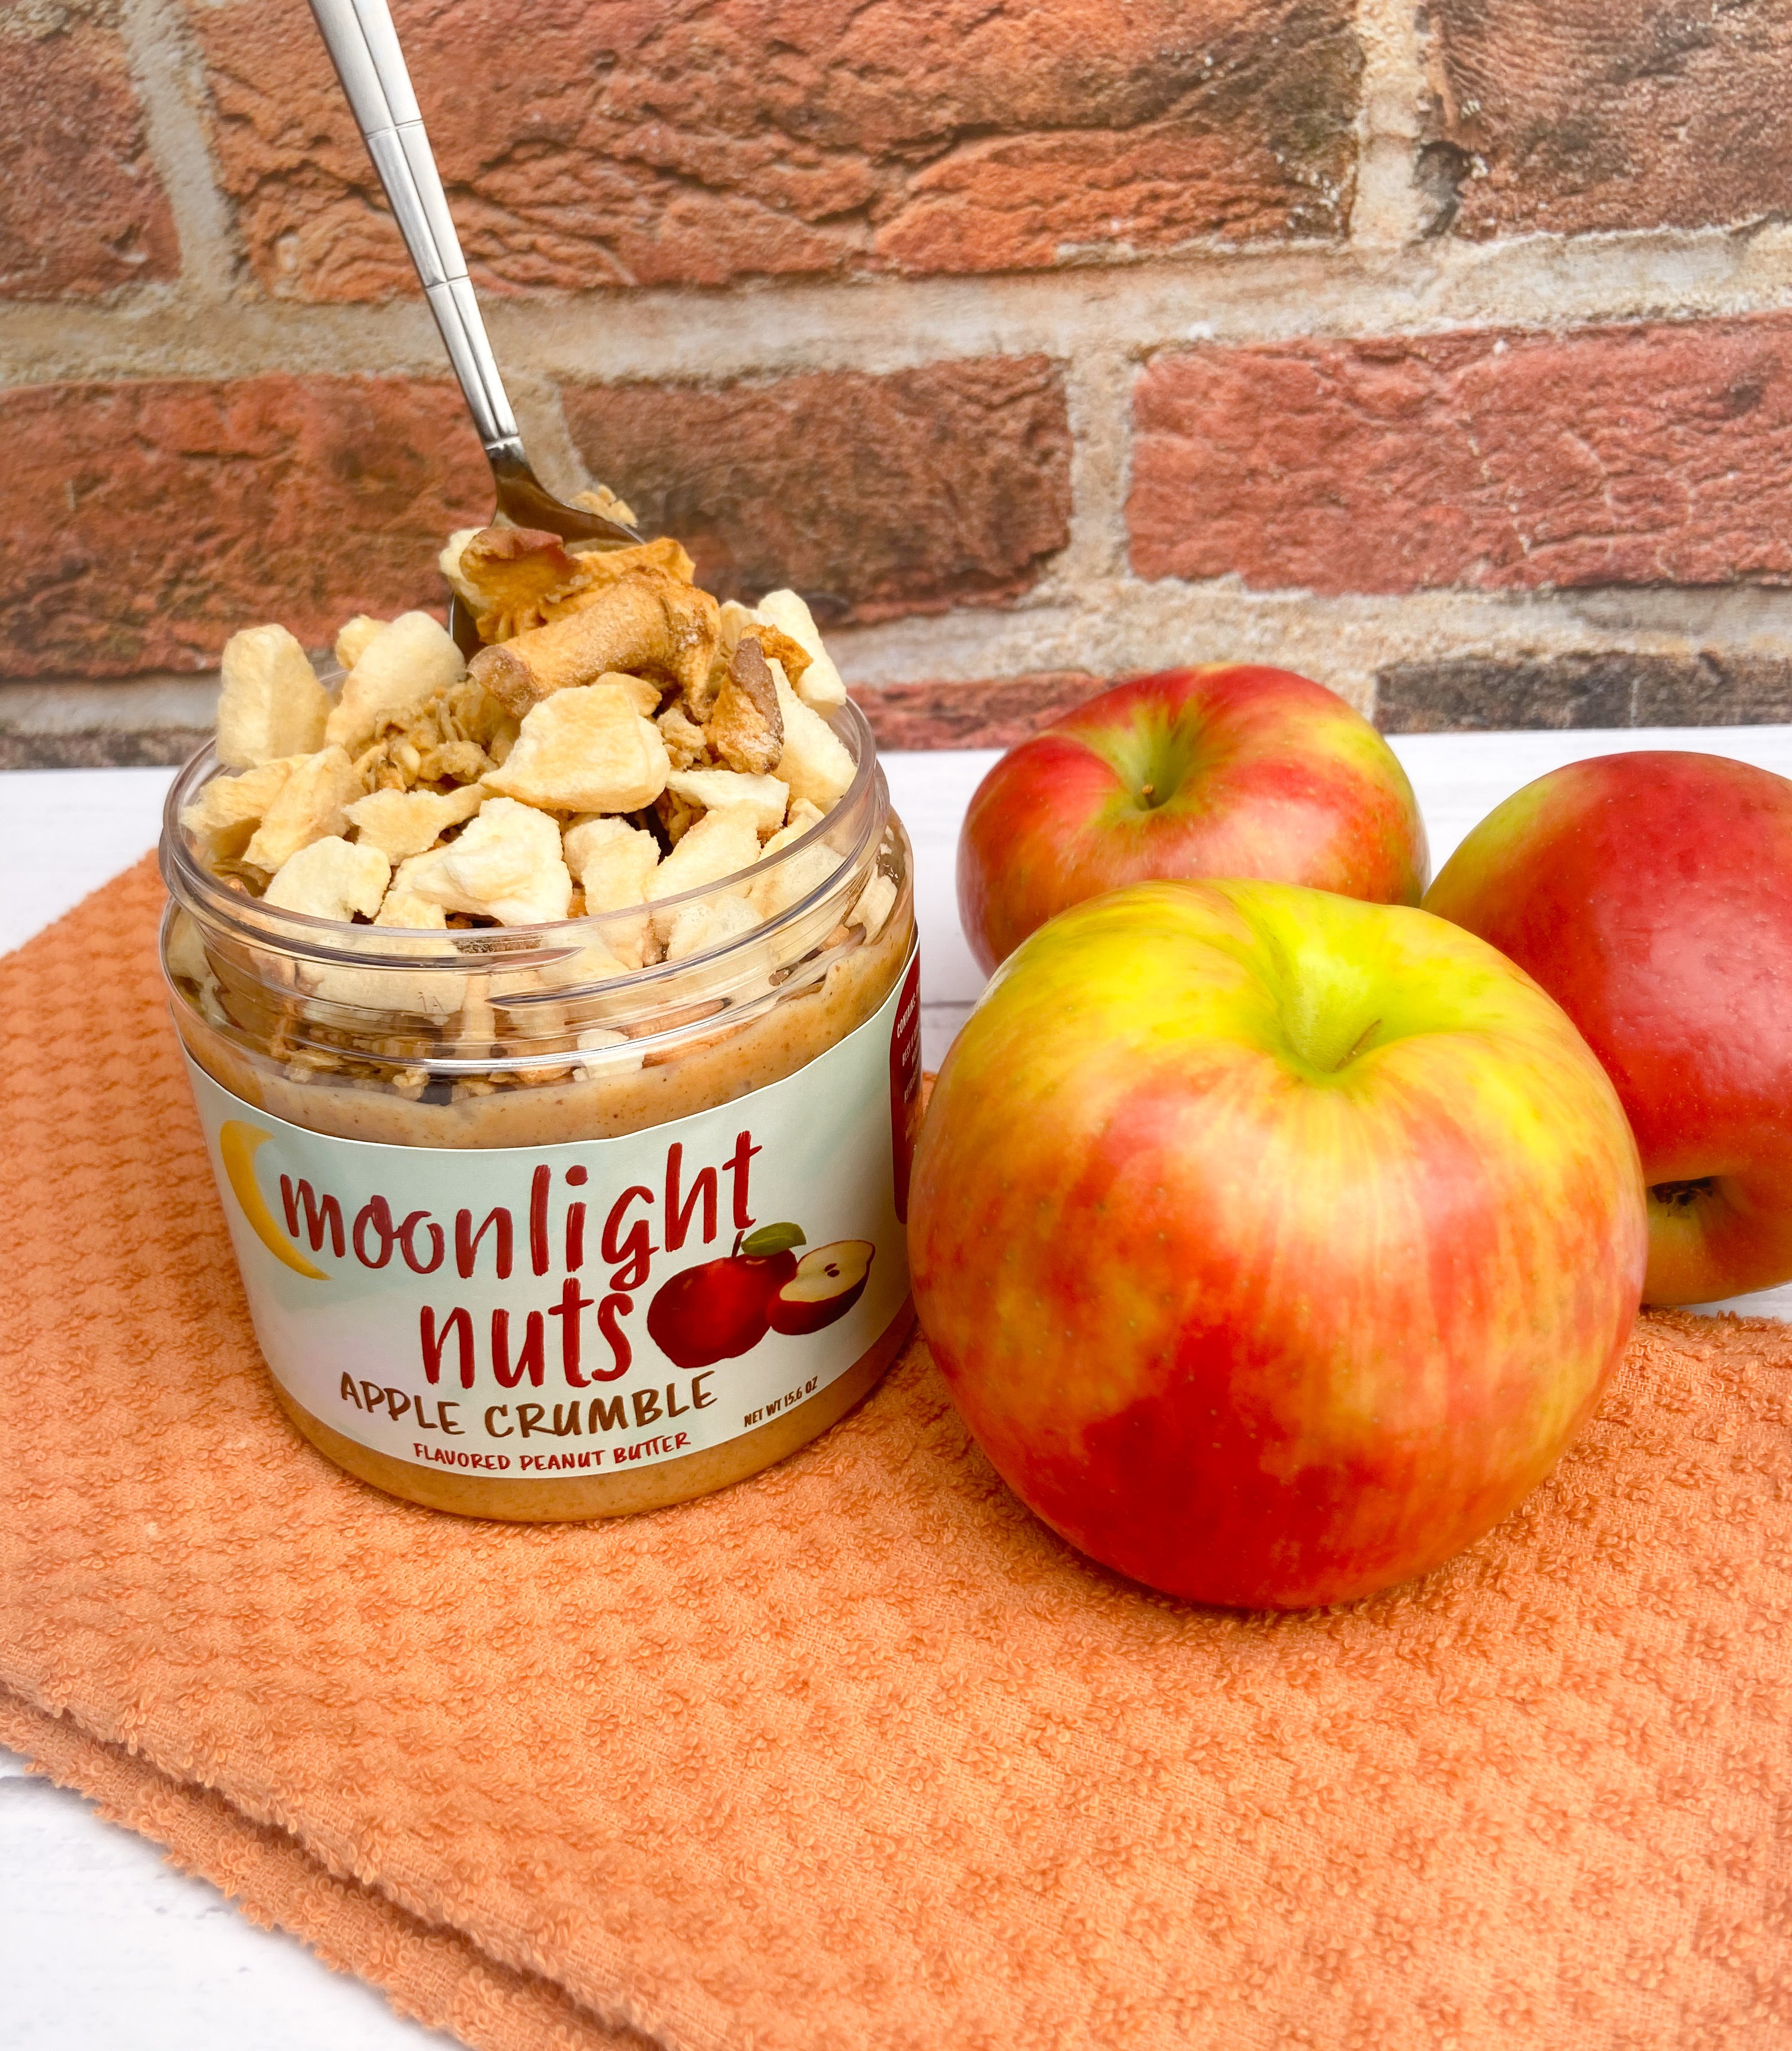 Apple Crumble- Flavored Peanut Butter